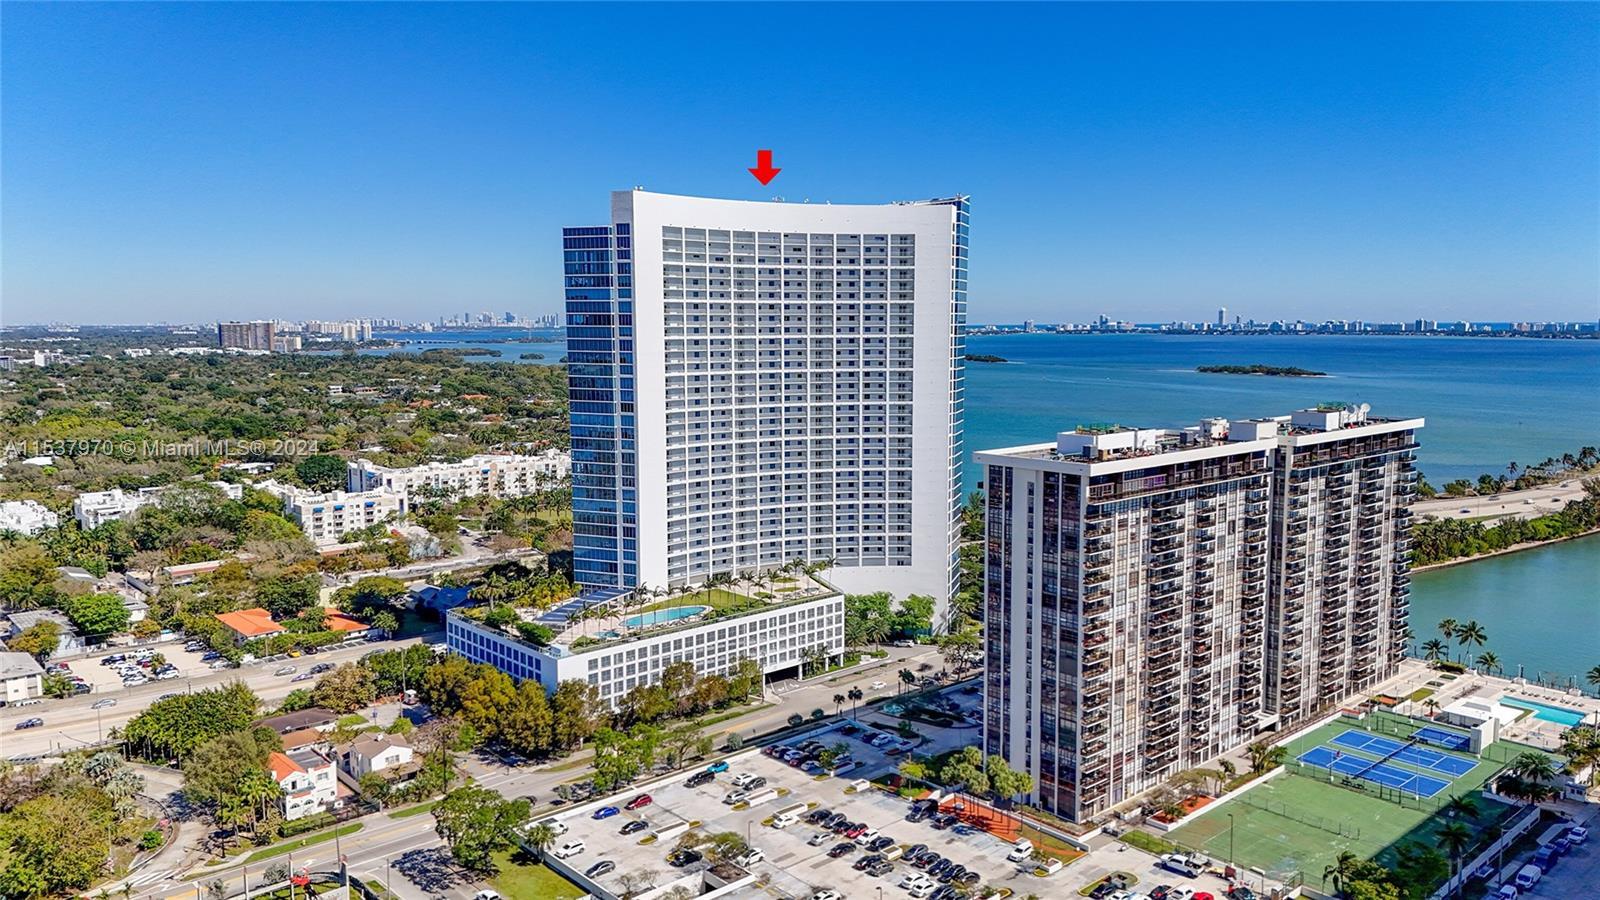 1/1 unit at Blue Condo in midtown Miami, close to everything that is GREAT in our city. This condo i